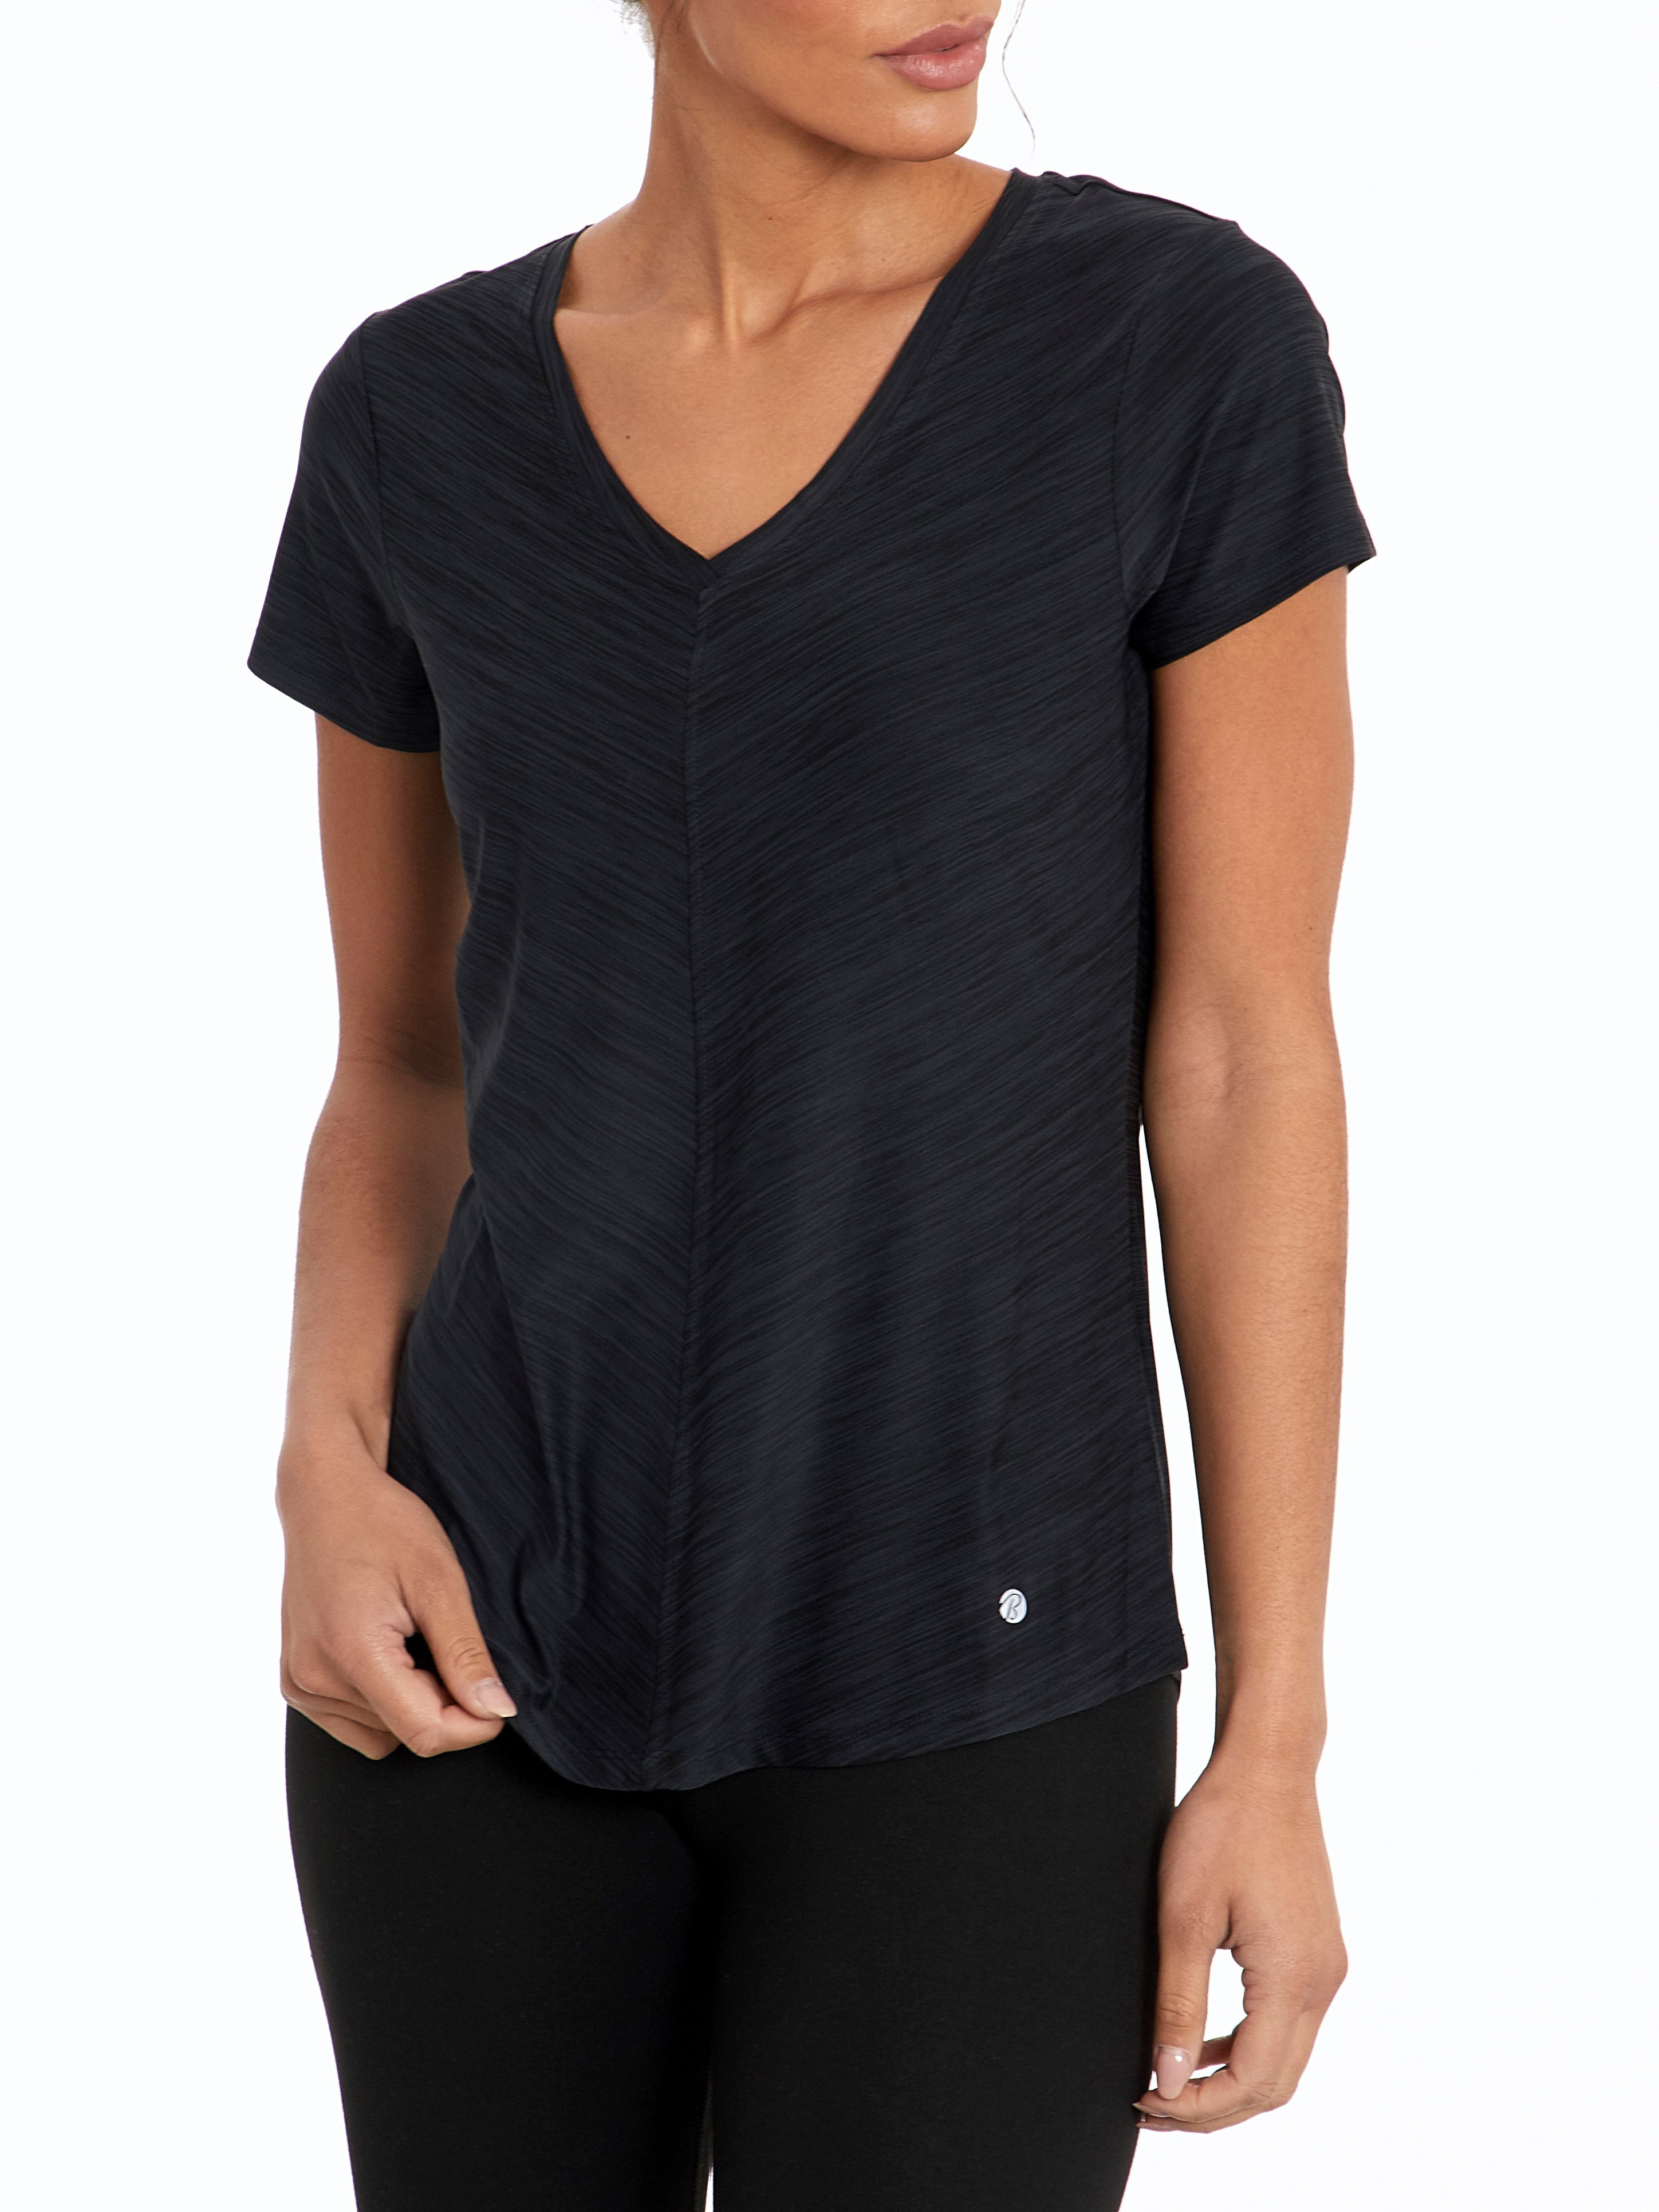 Bally Total Fitness Women's Active Mitered Tee - image 3 of 3